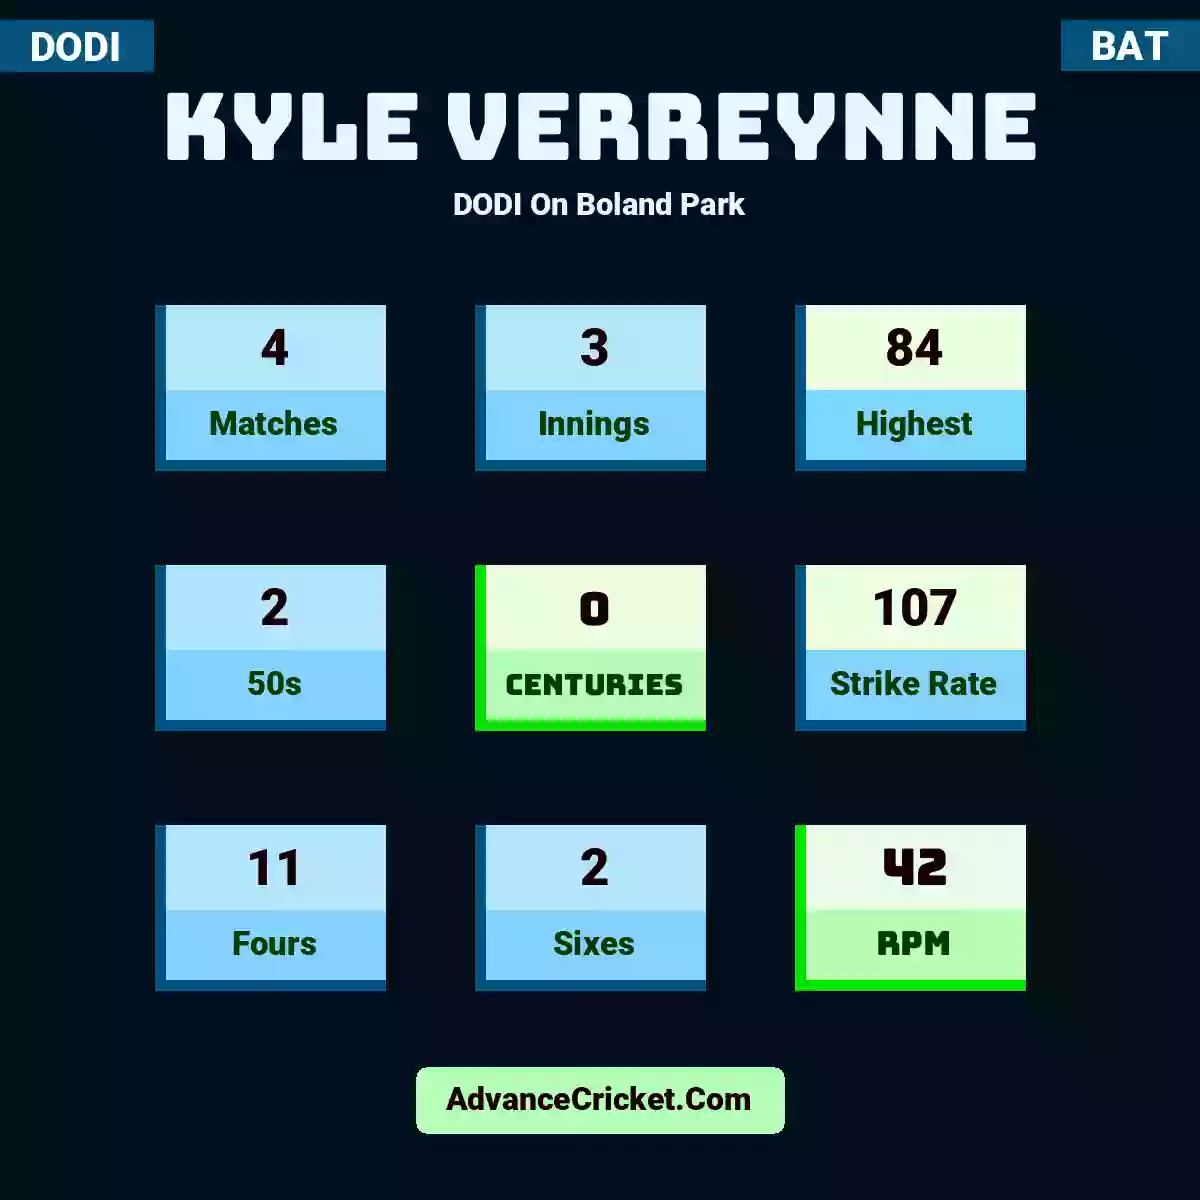 Kyle Verreynne DODI  On Boland Park, Kyle Verreynne played 4 matches, scored 84 runs as highest, 2 half-centuries, and 0 centuries, with a strike rate of 107. K.Verreynne hit 11 fours and 2 sixes, with an RPM of 42.